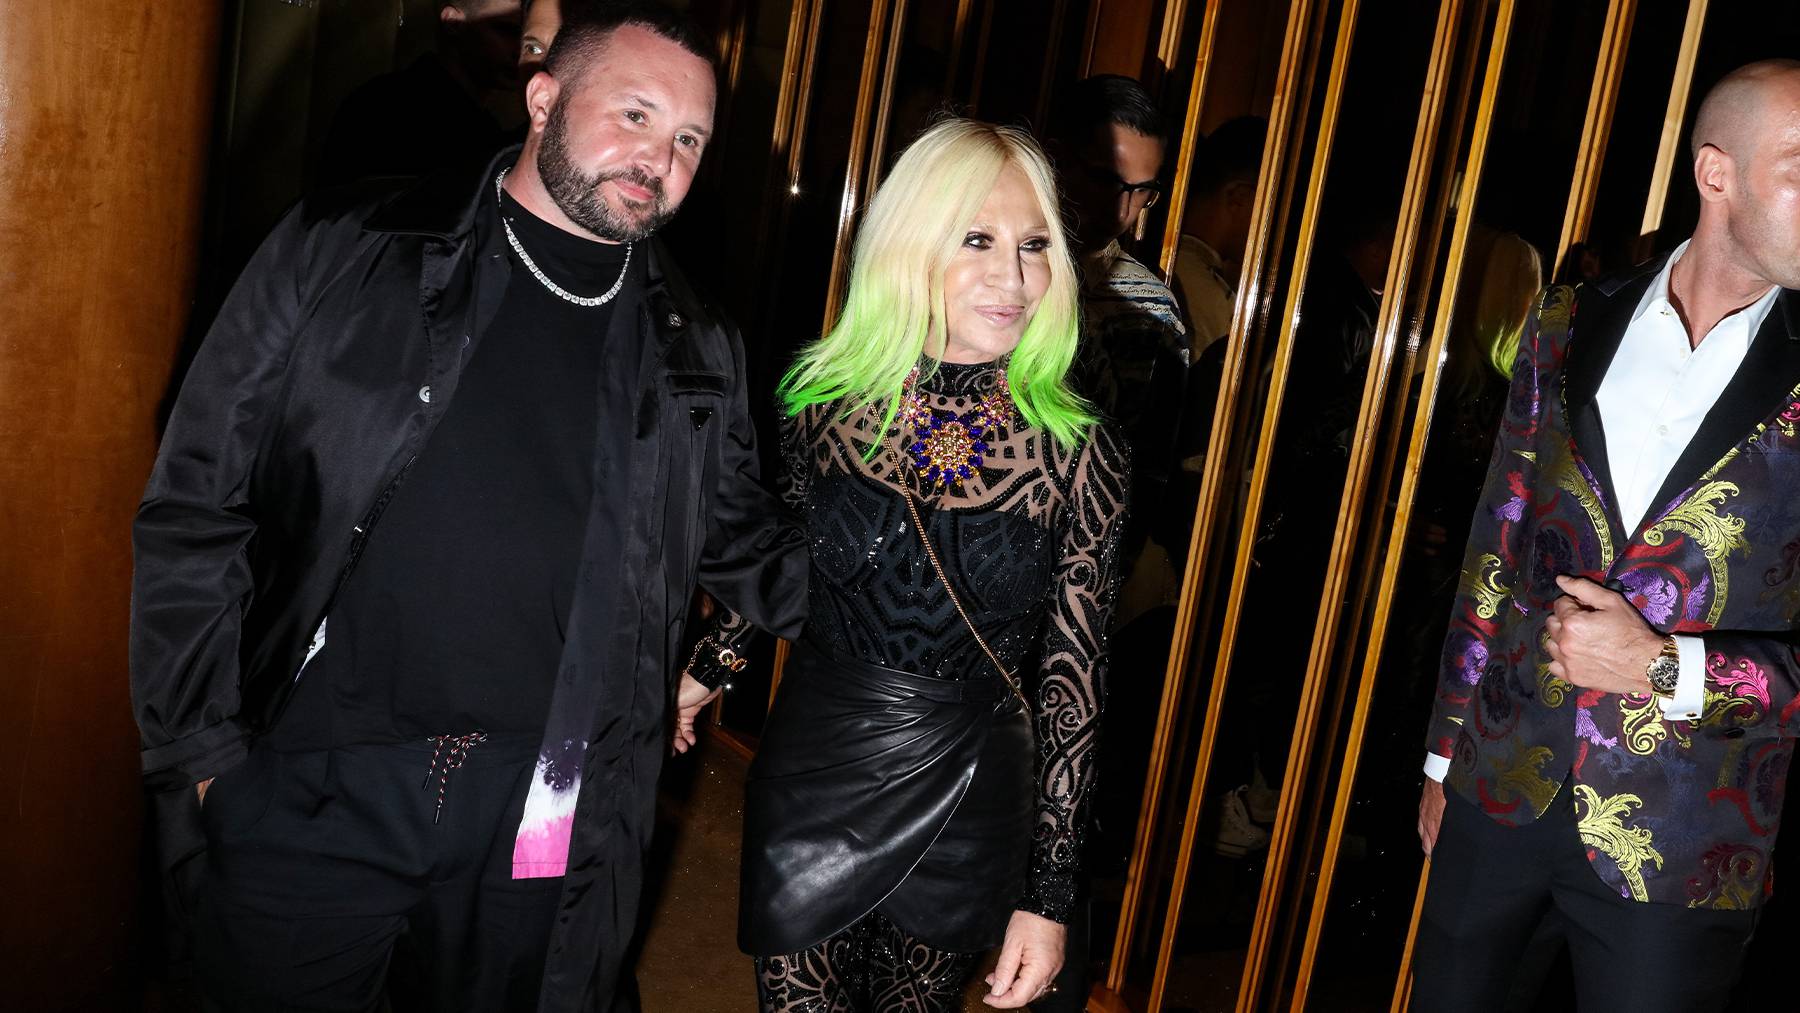 Kim Jones and Donatella Versace arrive at the Met Gala afterparty in 2019.